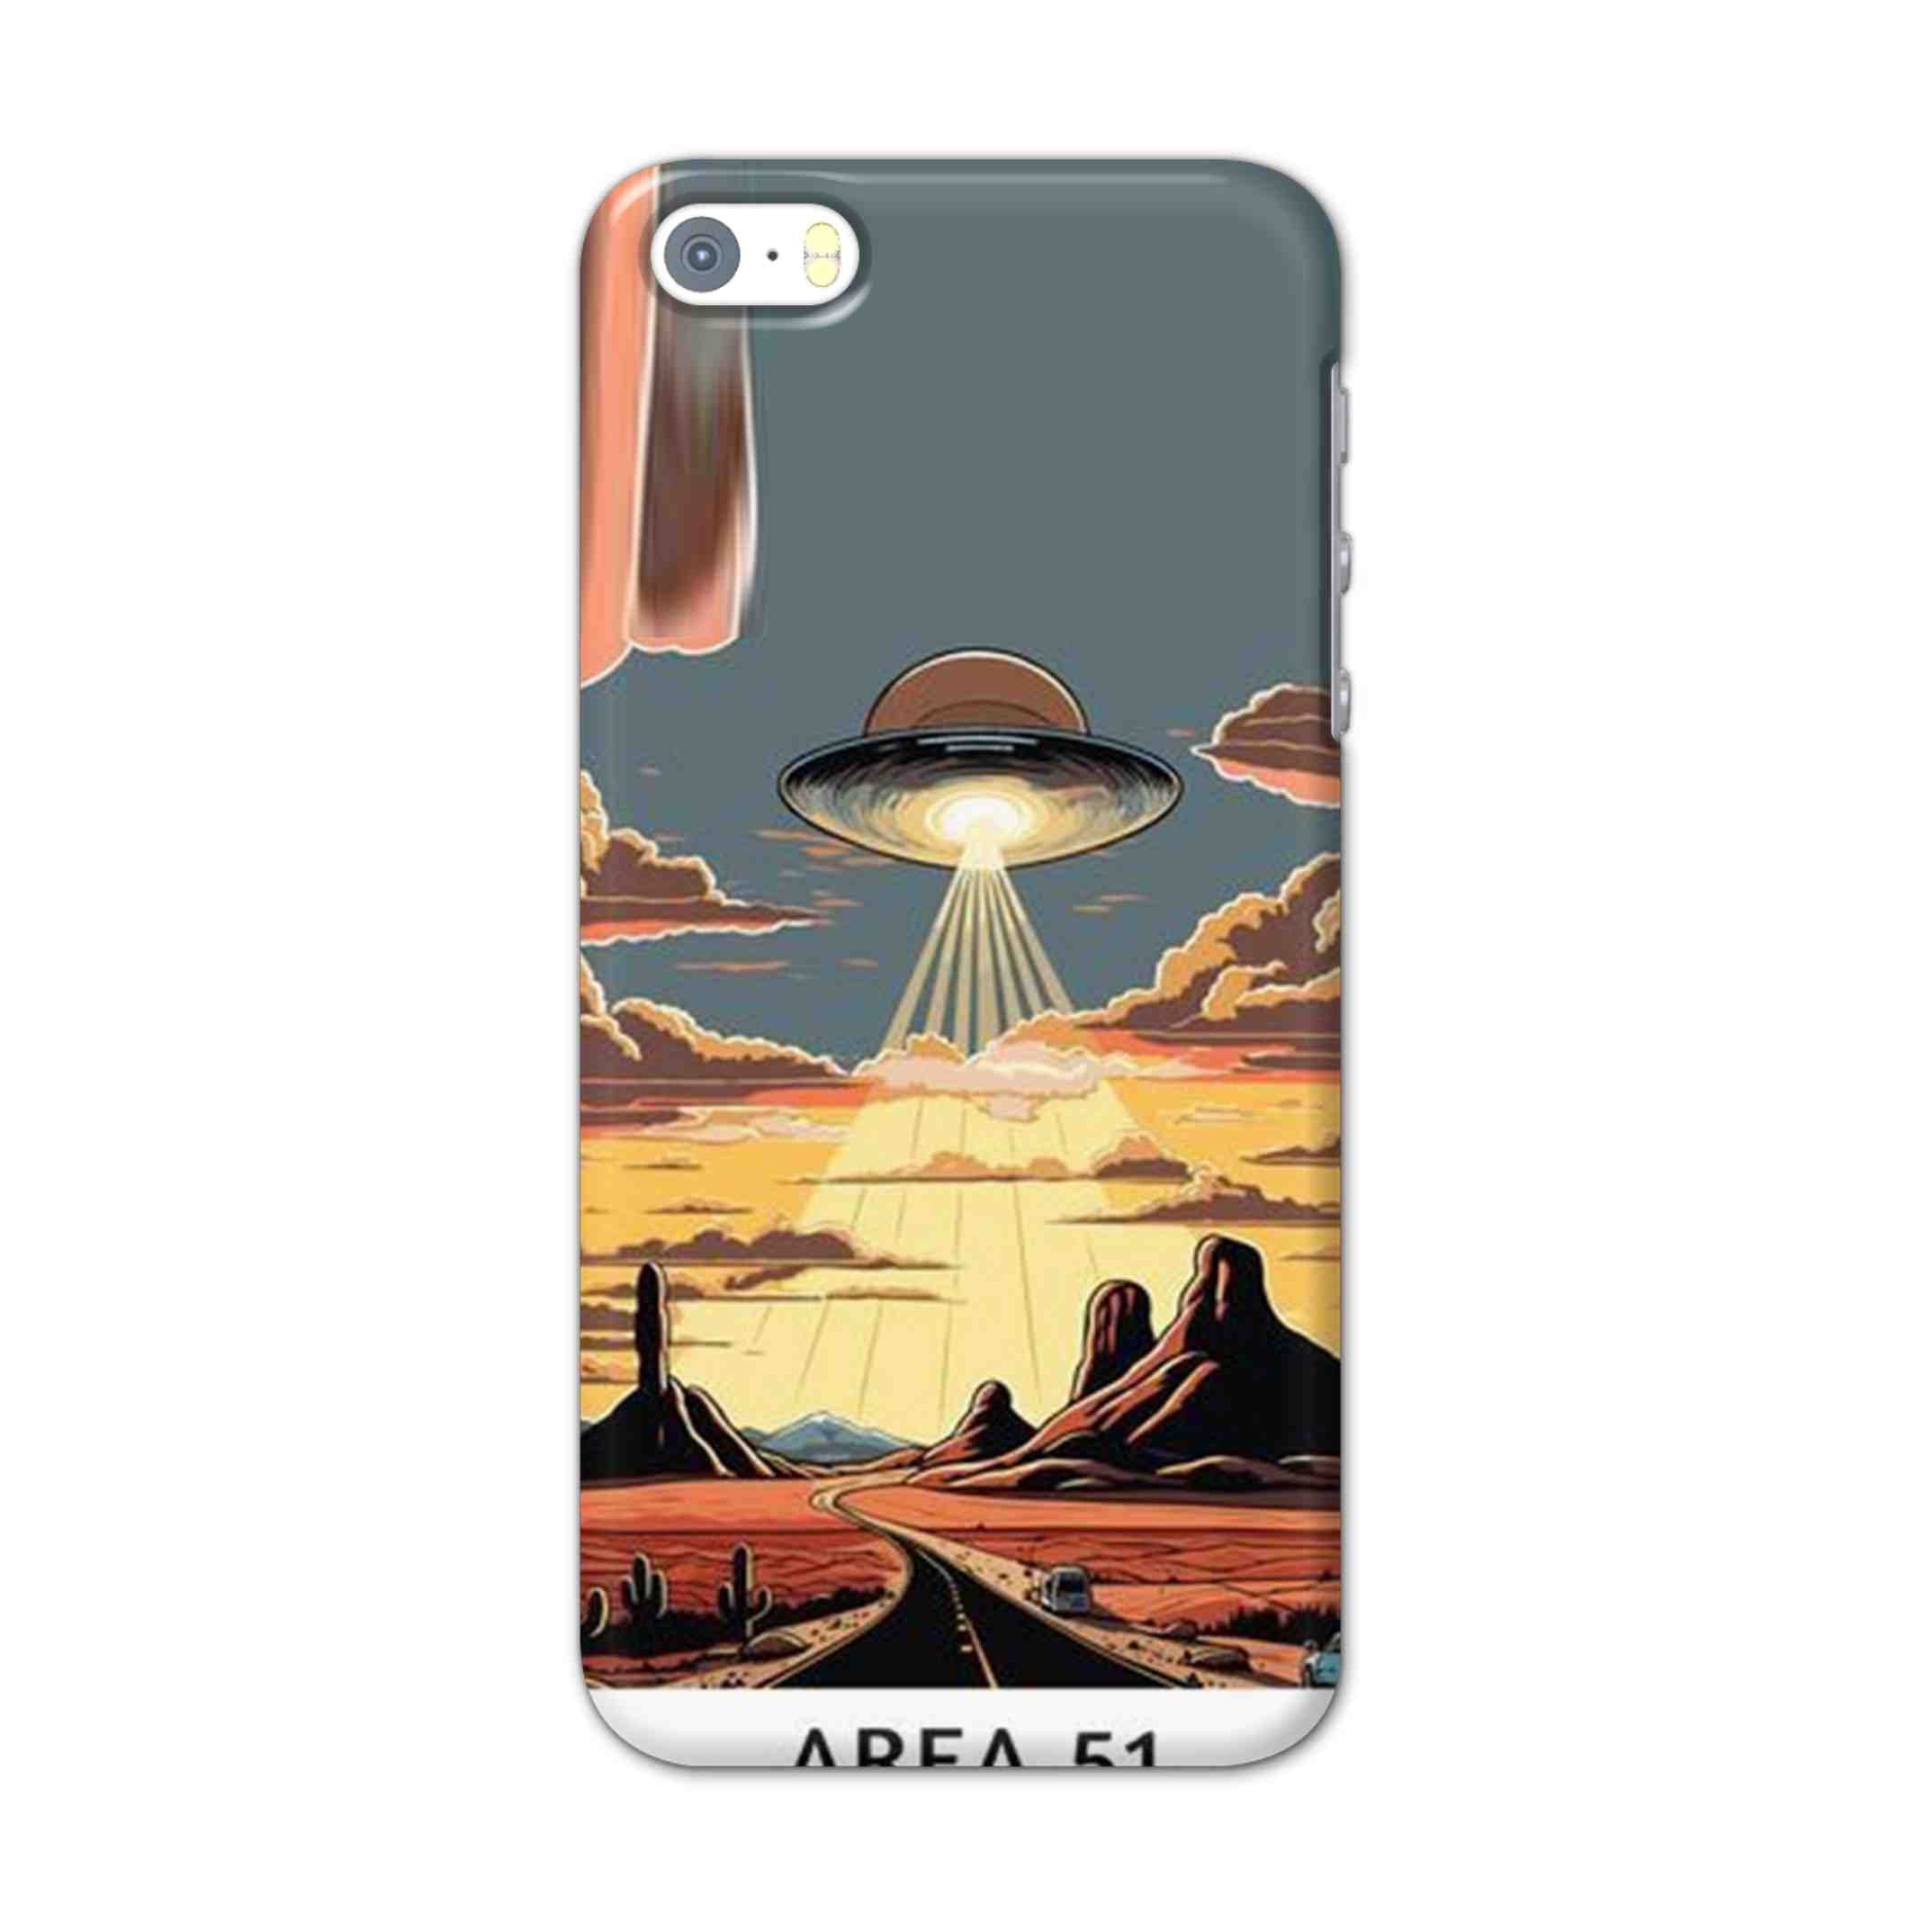 Buy Area 51 Hard Back Mobile Phone Case/Cover For Apple Iphone SE Online